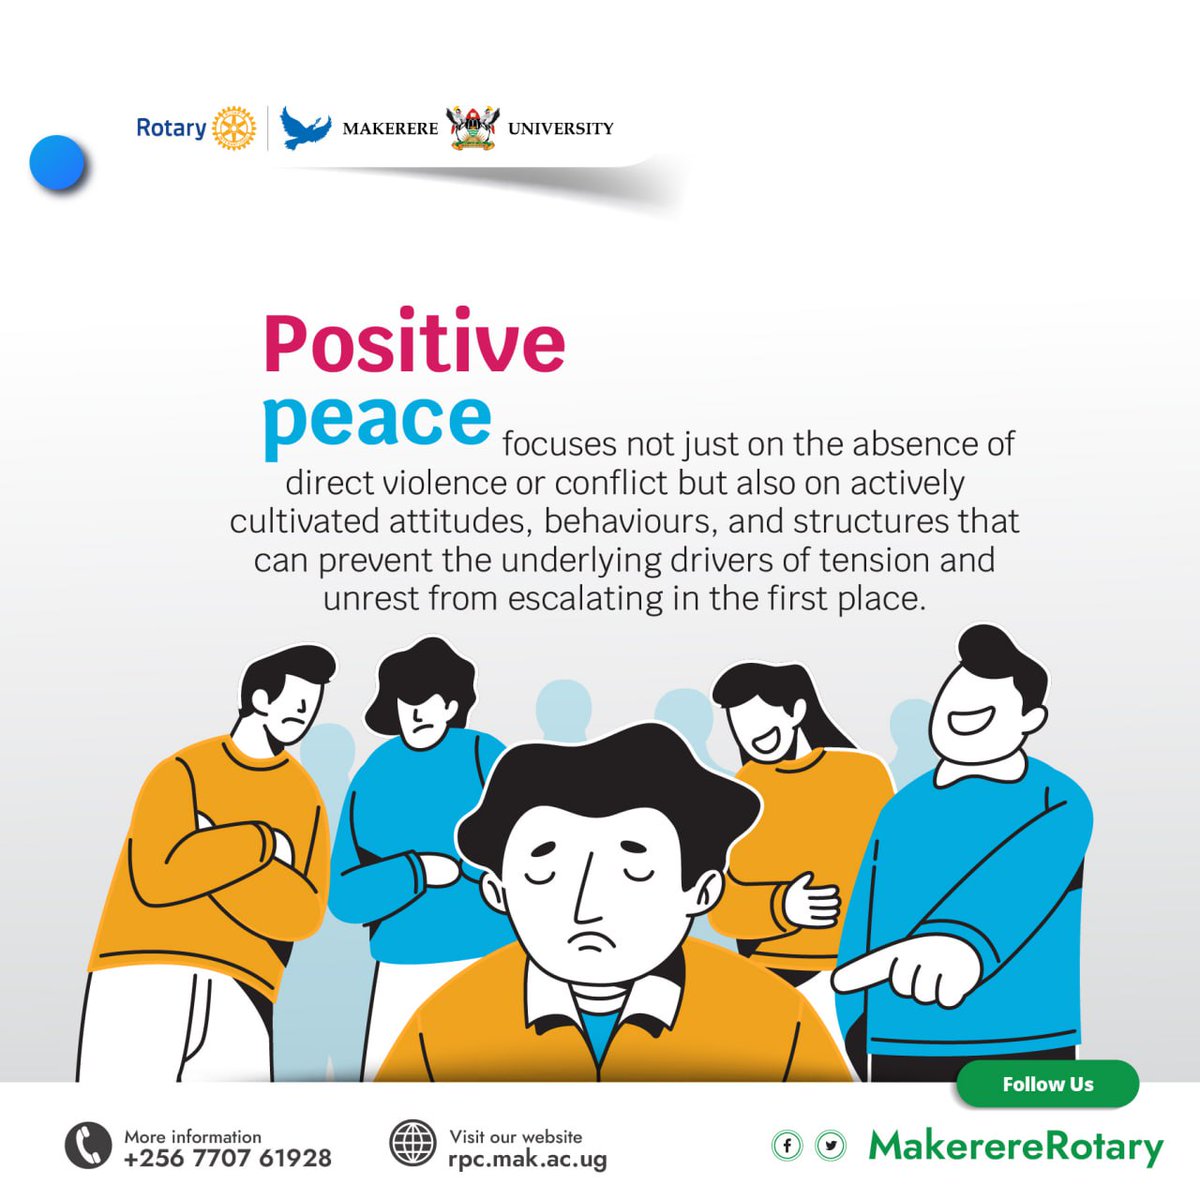 Recent research from institutes dedicated to peace studies reveals that Rotary's grassroots service model aligns powerfully with an emerging framework known as 'positive peace.' - @mutimbanyokac, Rotary Peace Fellow at @MakerereRotary / @Makerere.